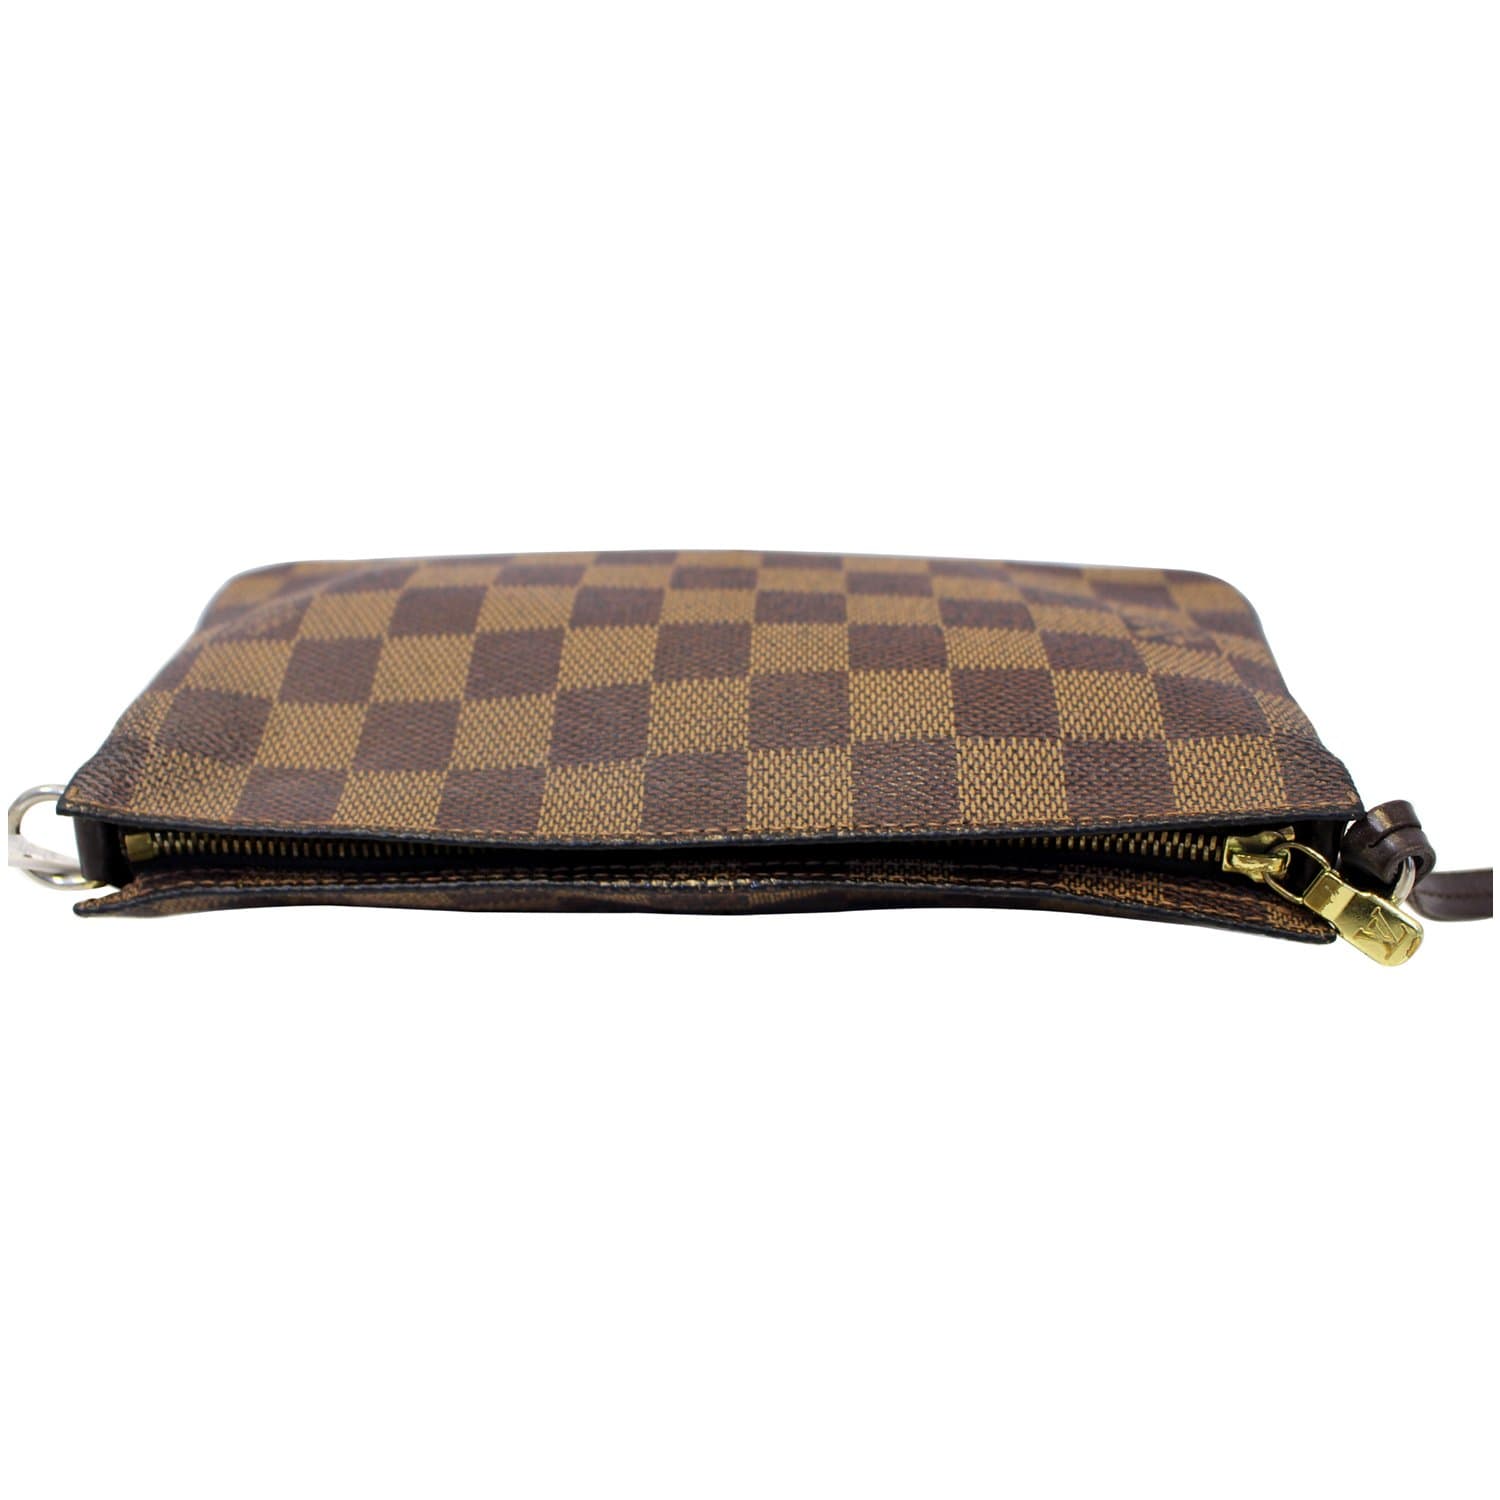 Get ready with LV Damier pouch🤎 Louis Vuitton Damier Navona